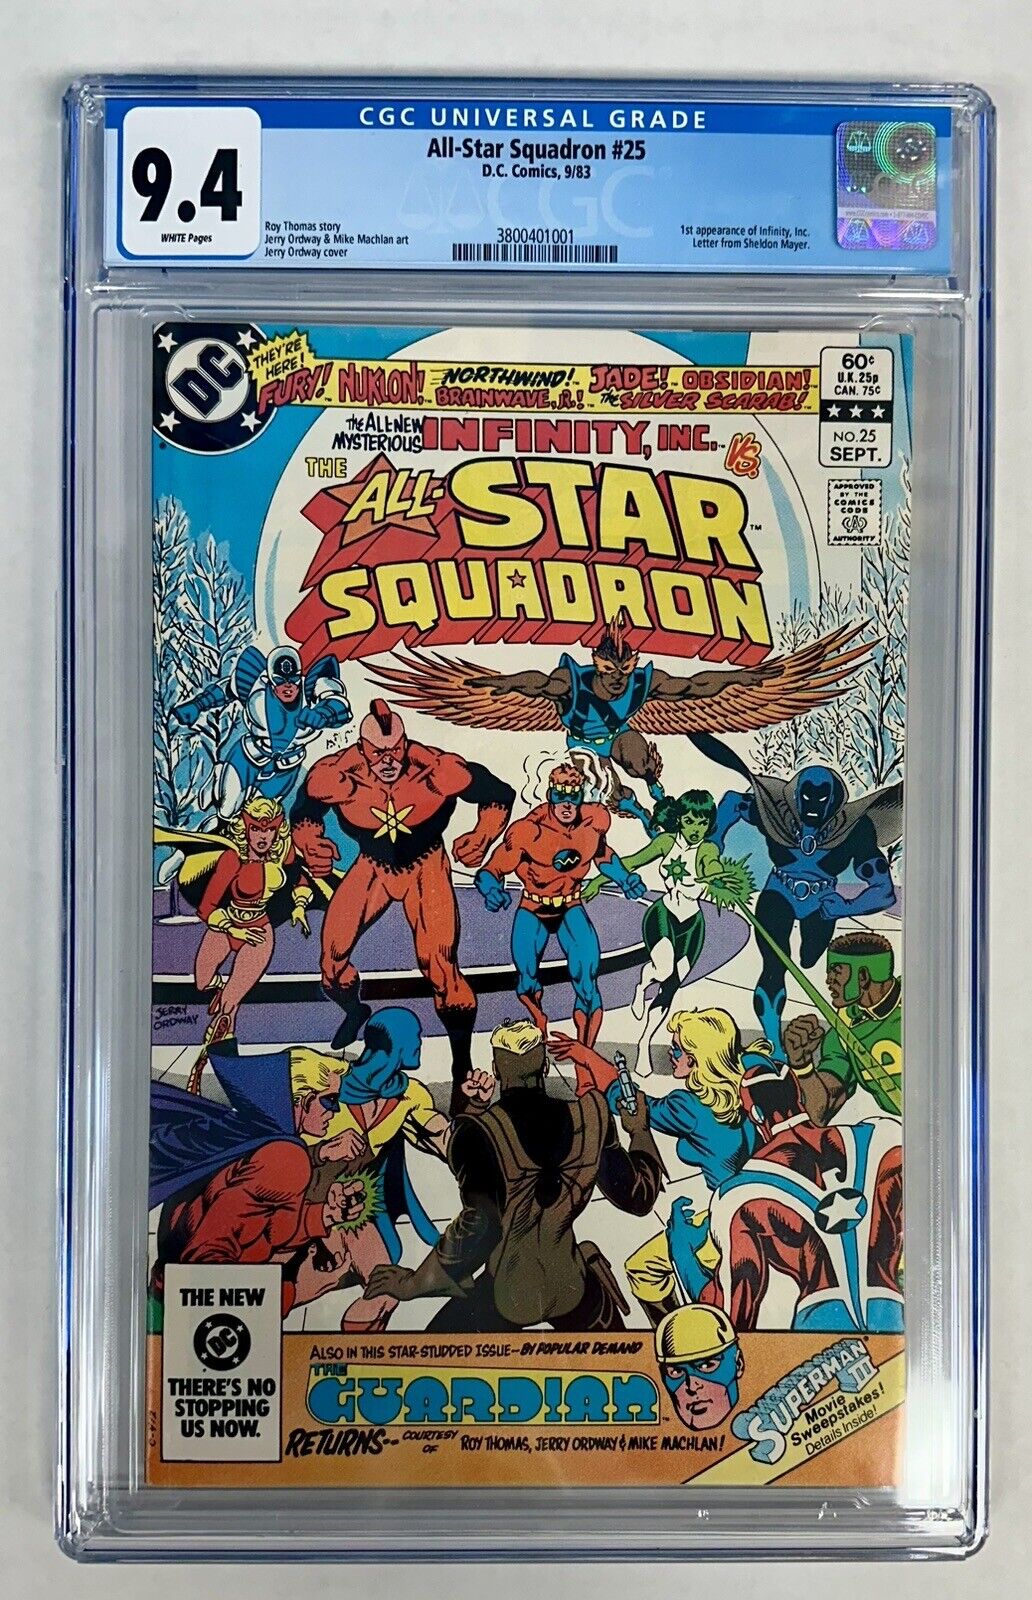 All Star Squadron #25 -CGC 9.4 First Appearance of Infinity Inc - KEY - DC 1983